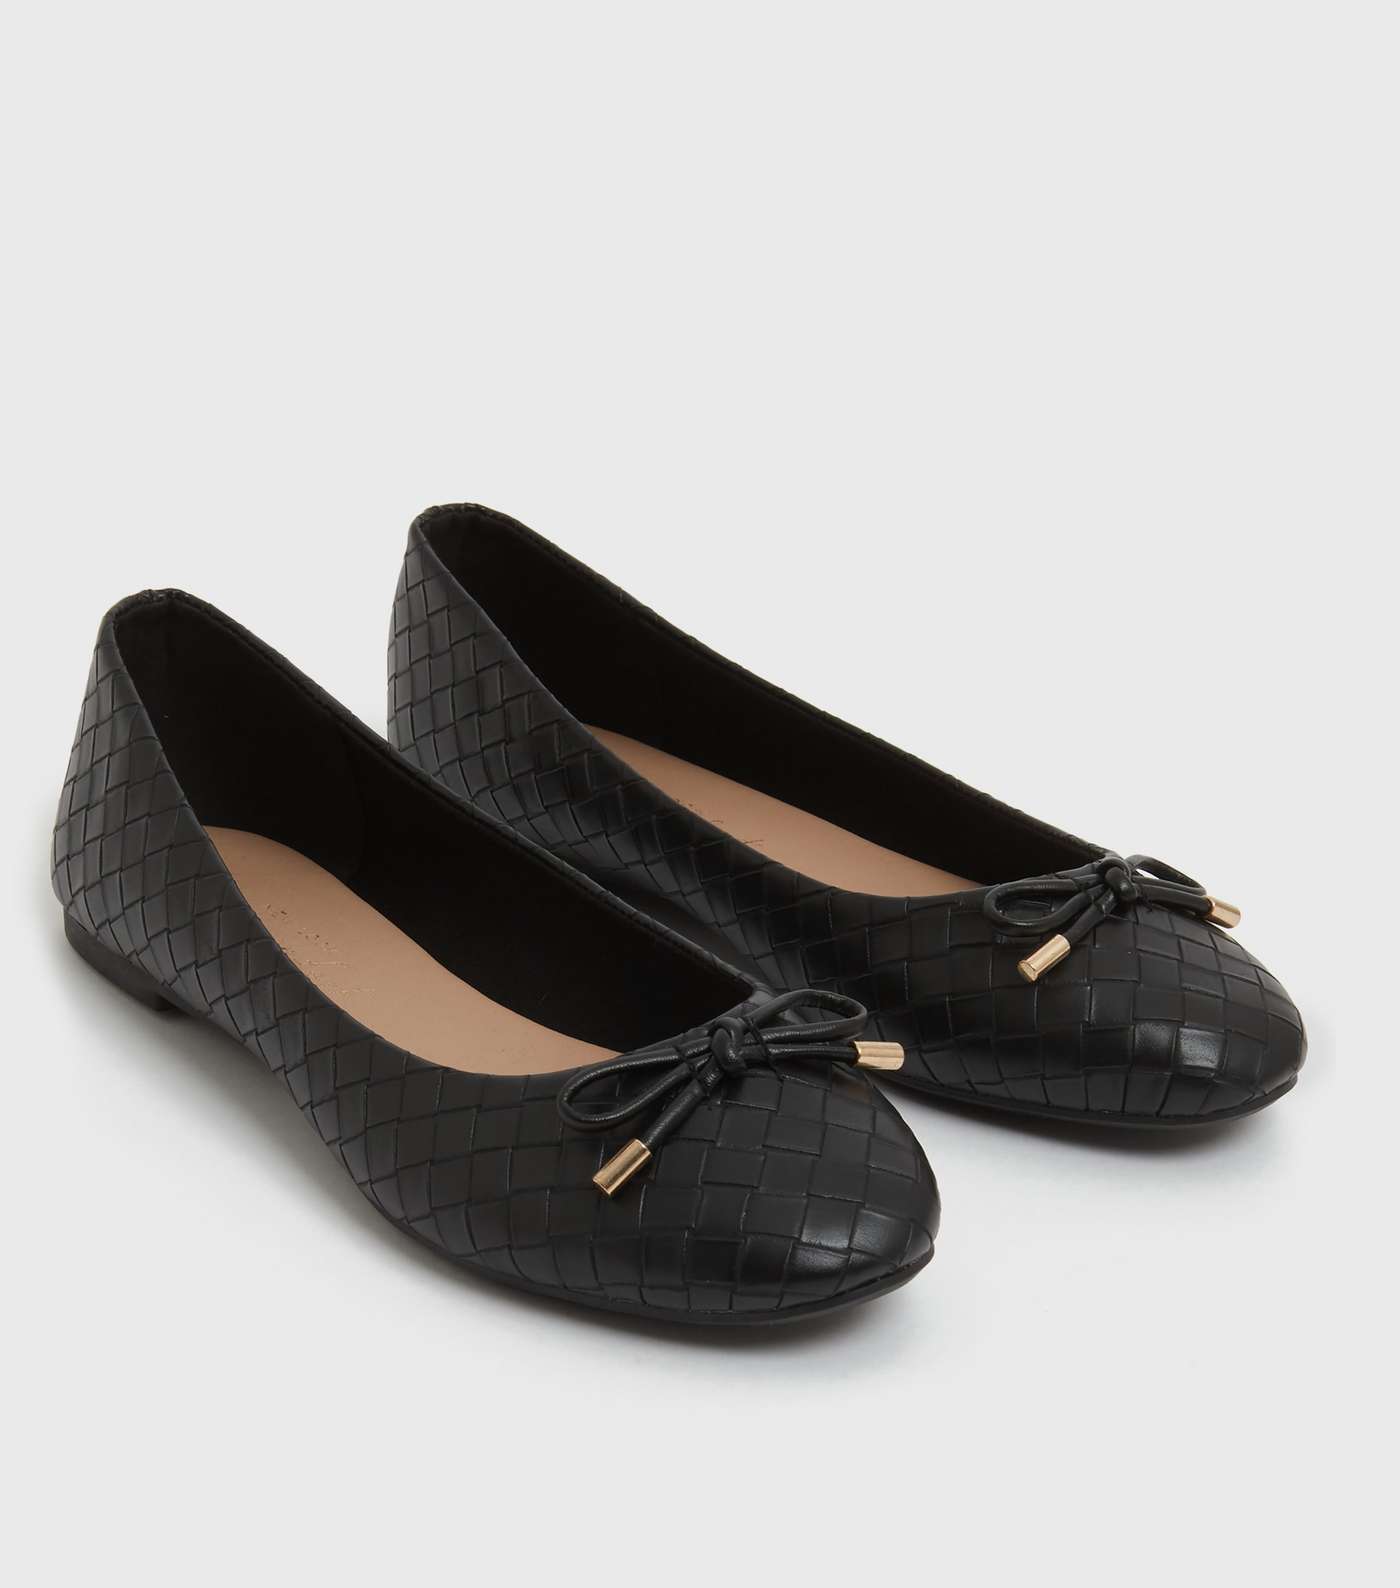 Black Woven Leather-Look Bow Ballet Pumps Image 3